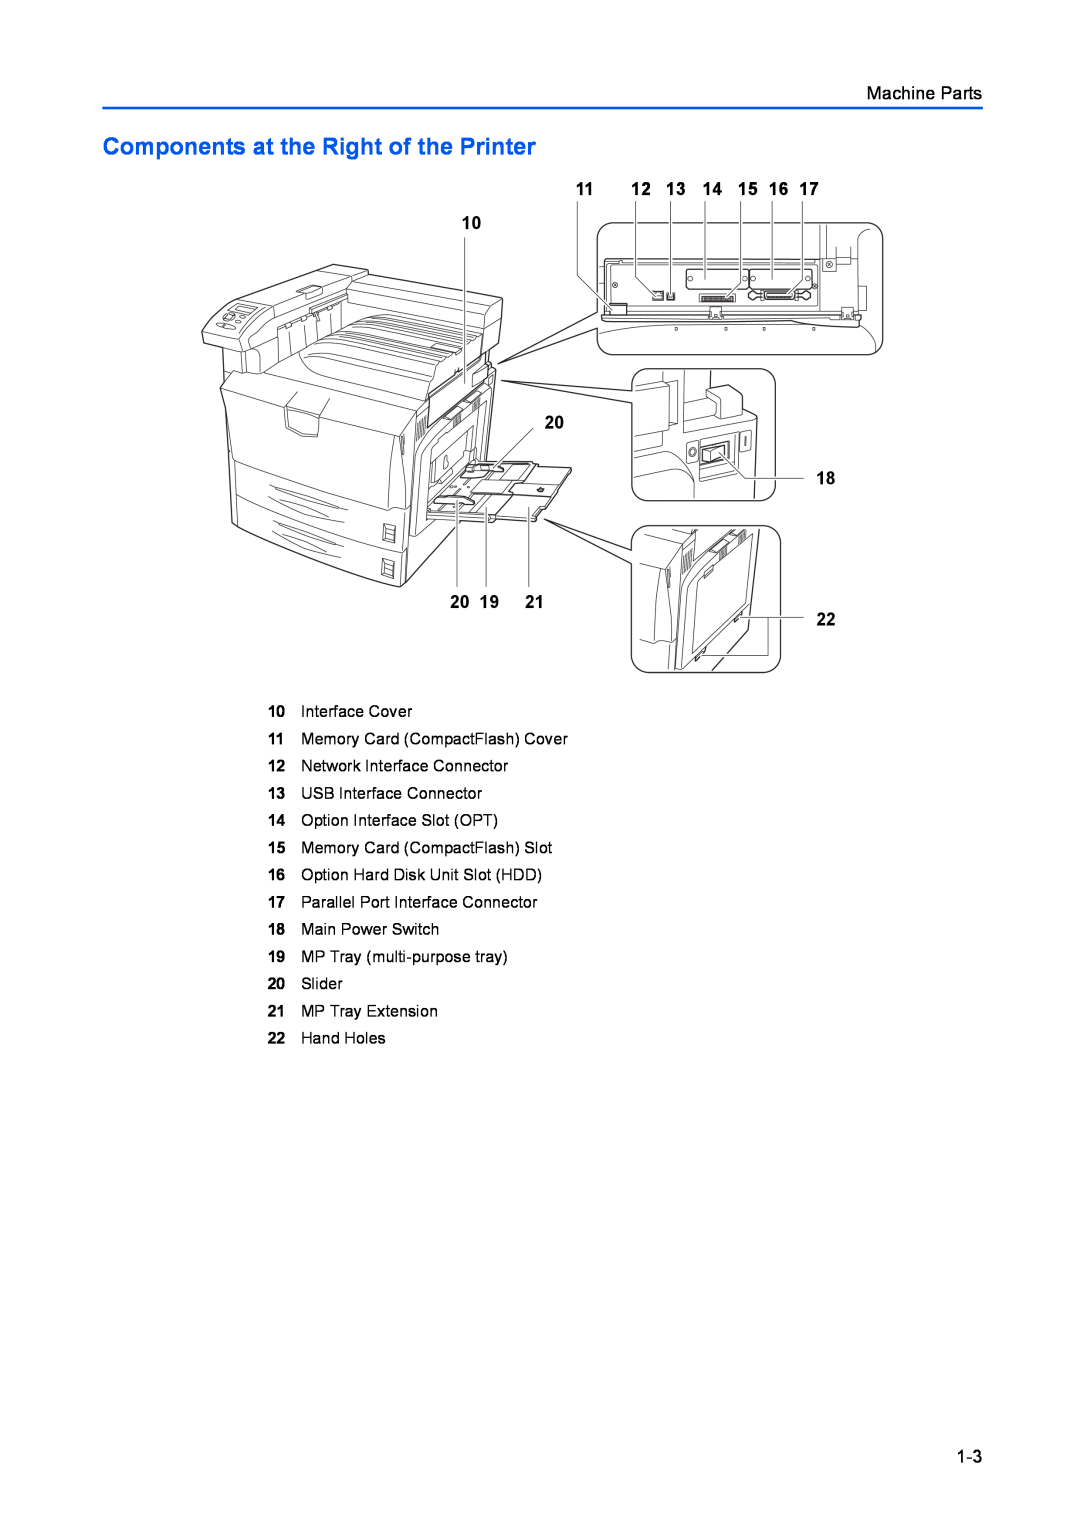 Kyocera FS-C8100DN manual Components at the Right of the Printer, 11 12 13 14 15 16, 20 19, Machine Parts 